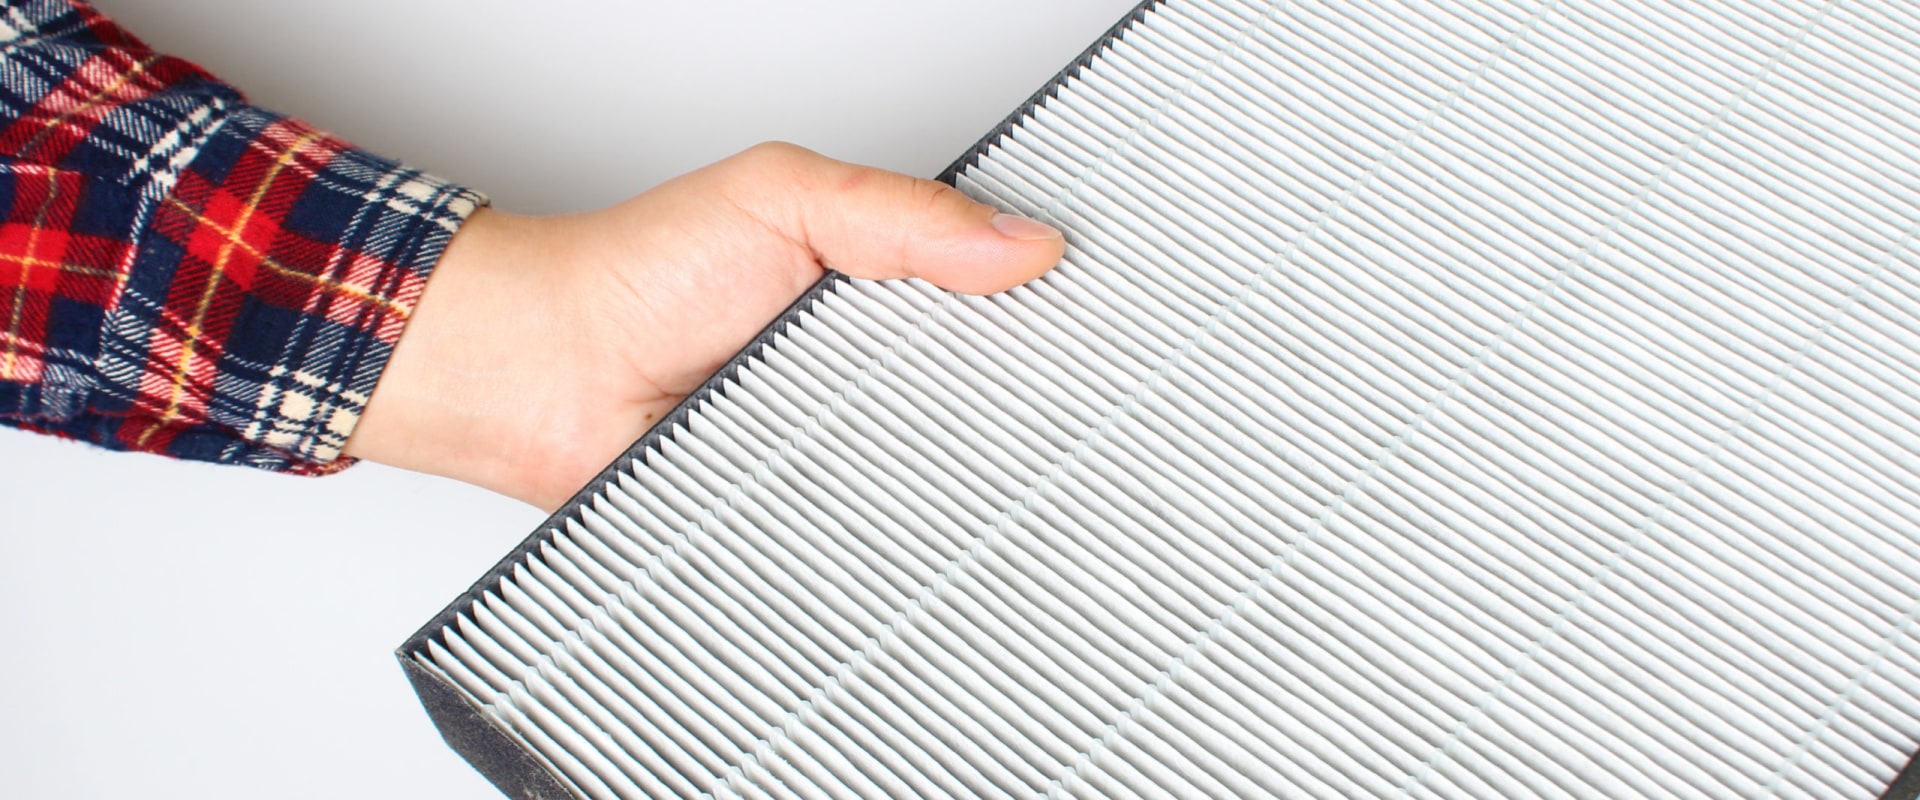 Does a Cheap Air Filter Make a Difference? - An Expert's Perspective